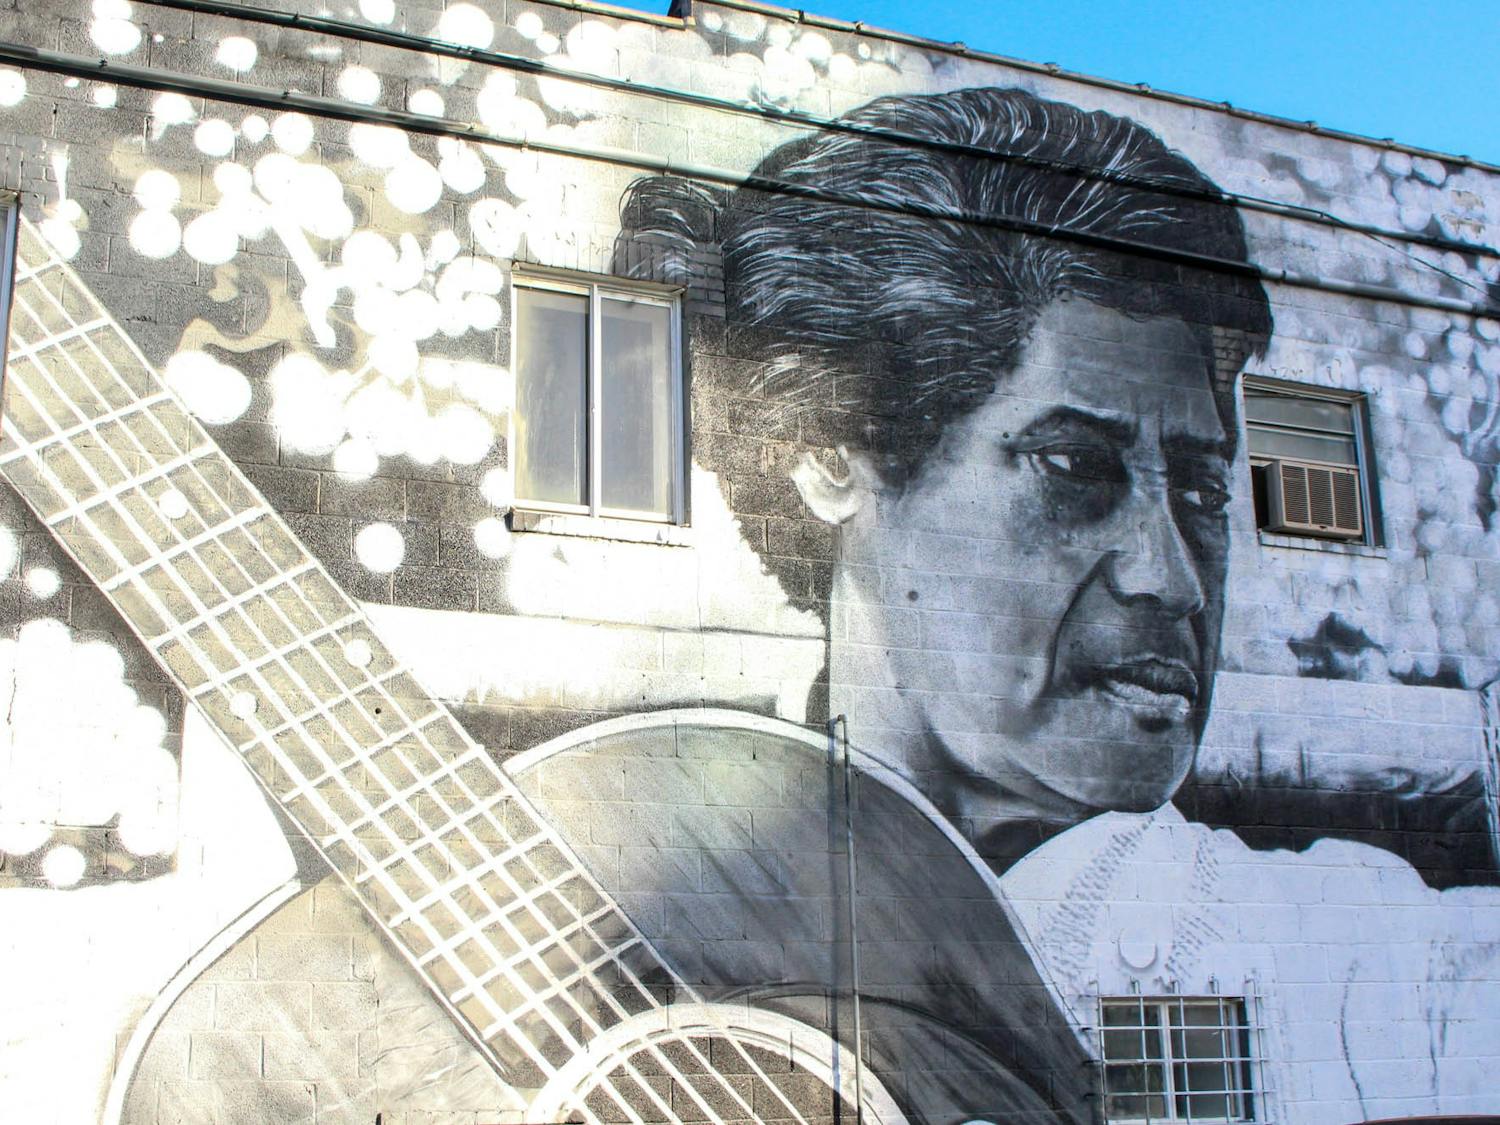 Elizabeth “Libba” Cotten was born in Carrboro, NC, and wrote her most famous song at age 11. She is now being honored by being inducted into the Rock and Roll Hall of Fame. Elizabeth “Libba” Cotten's mural was photographed on Nov. 7, 2022.